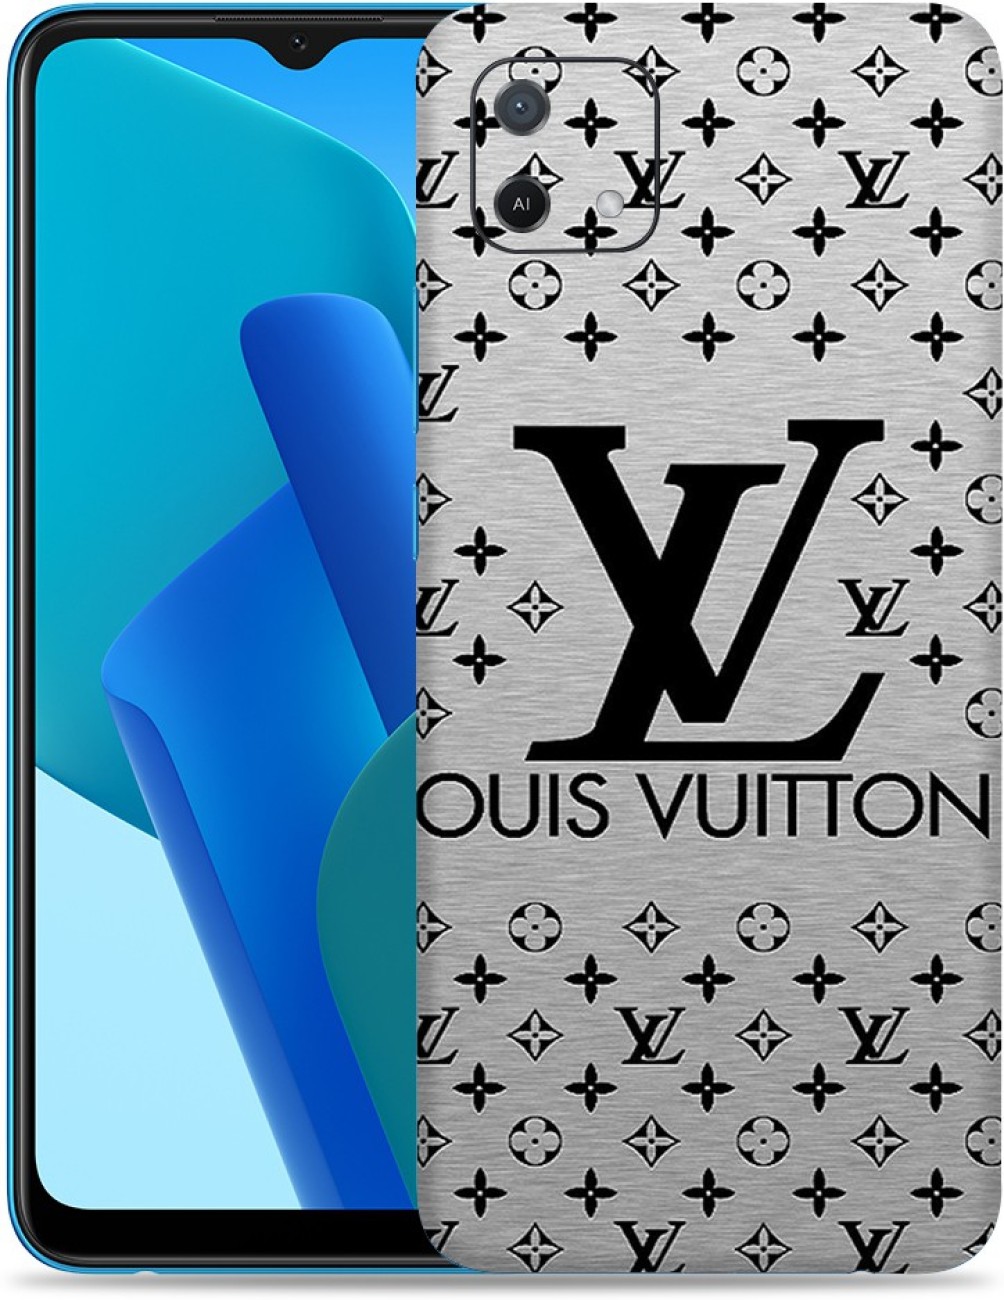 WeCre8 Skin's Samsung Galaxy S20 Fe 5g, Louis Vuitton Mobile Skin Price in  India - Buy WeCre8 Skin's Samsung Galaxy S20 Fe 5g, Louis Vuitton Mobile  Skin online at